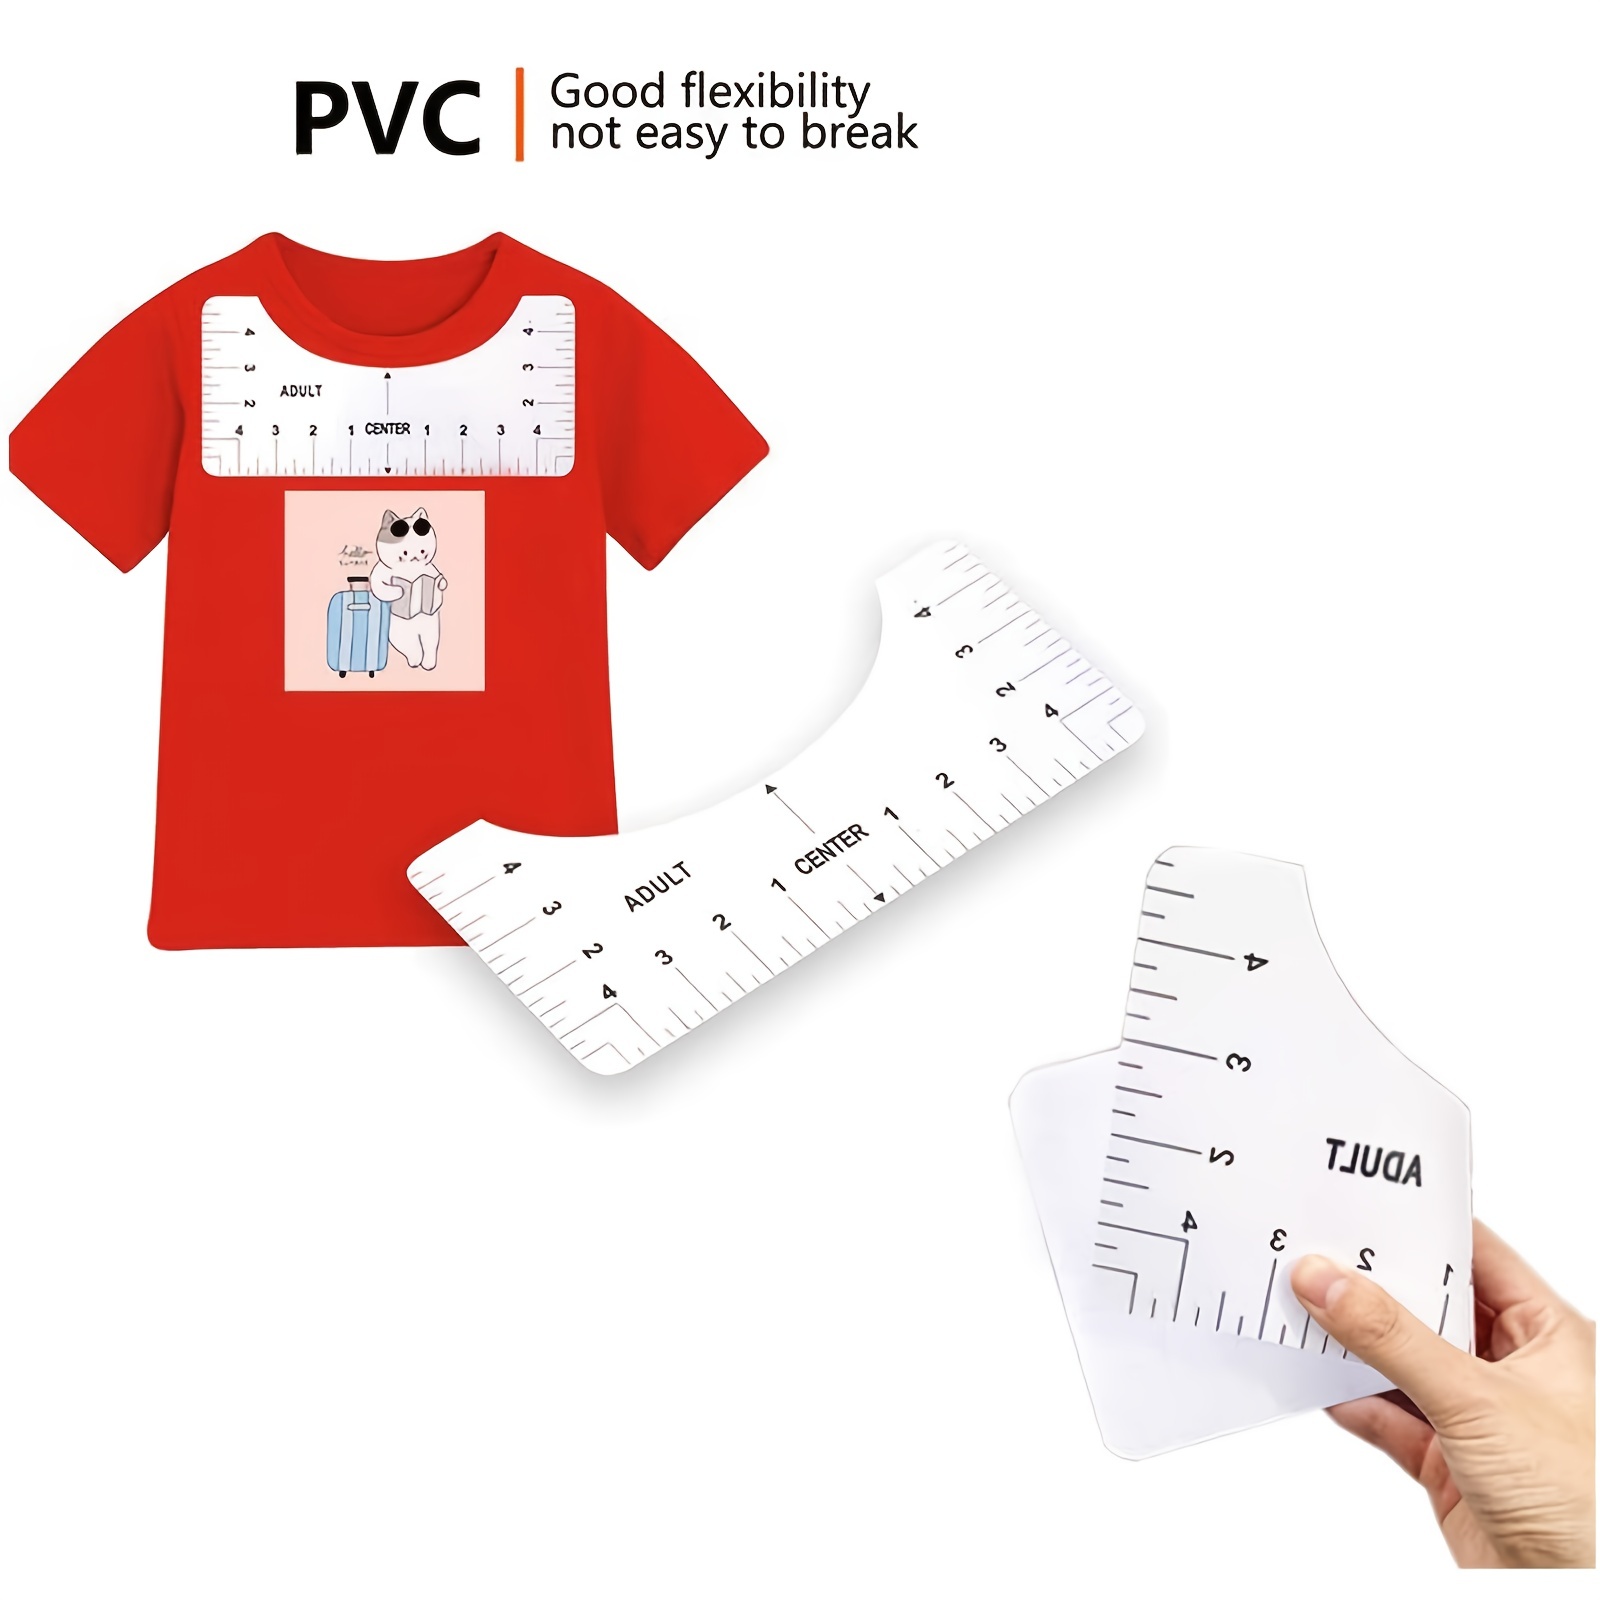 Tshirt Ruler Guide For Vinyl Alignment T Shirt Rulers To - Temu New Zealand